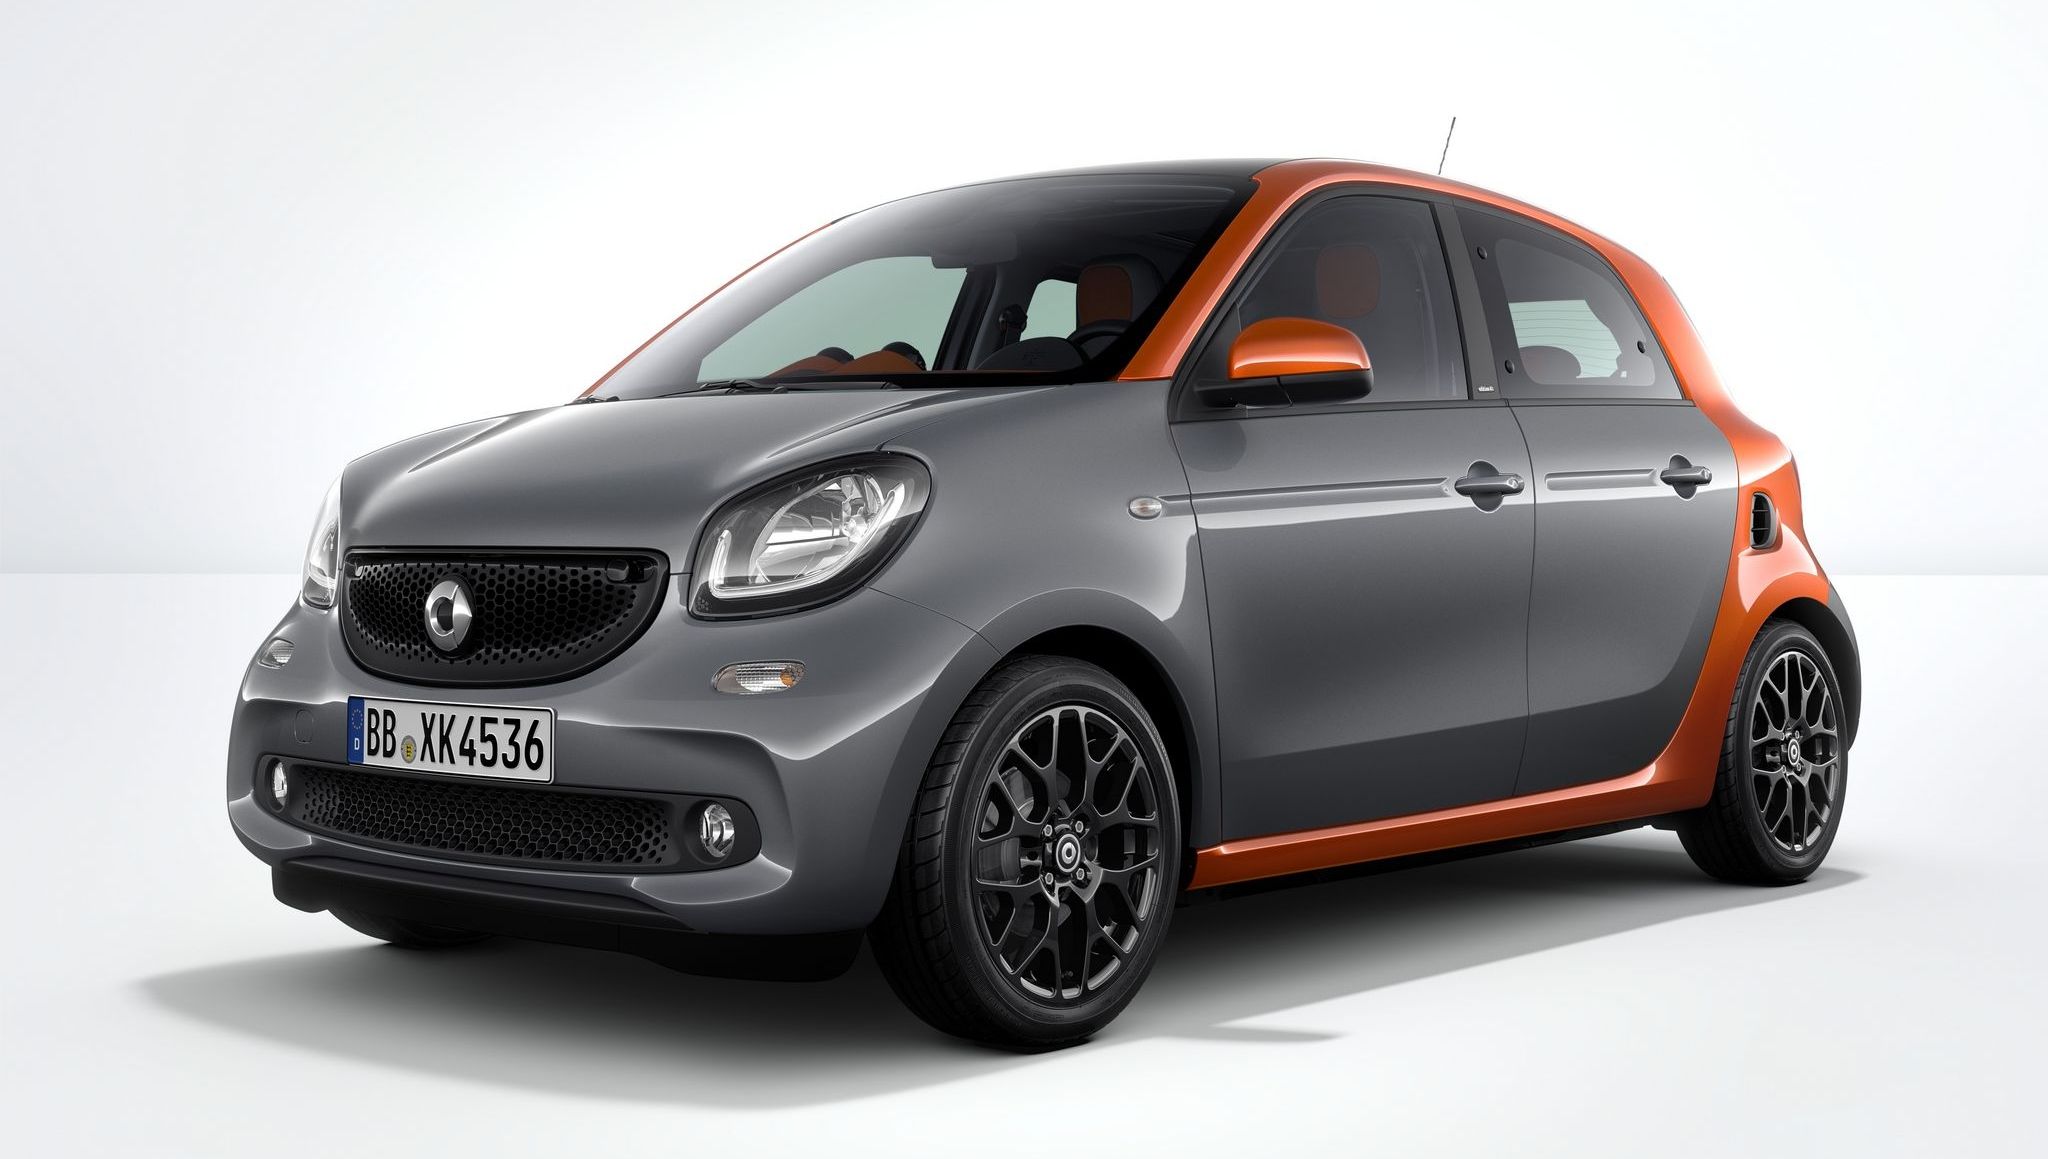 2015 Smart ForFour Edition 1